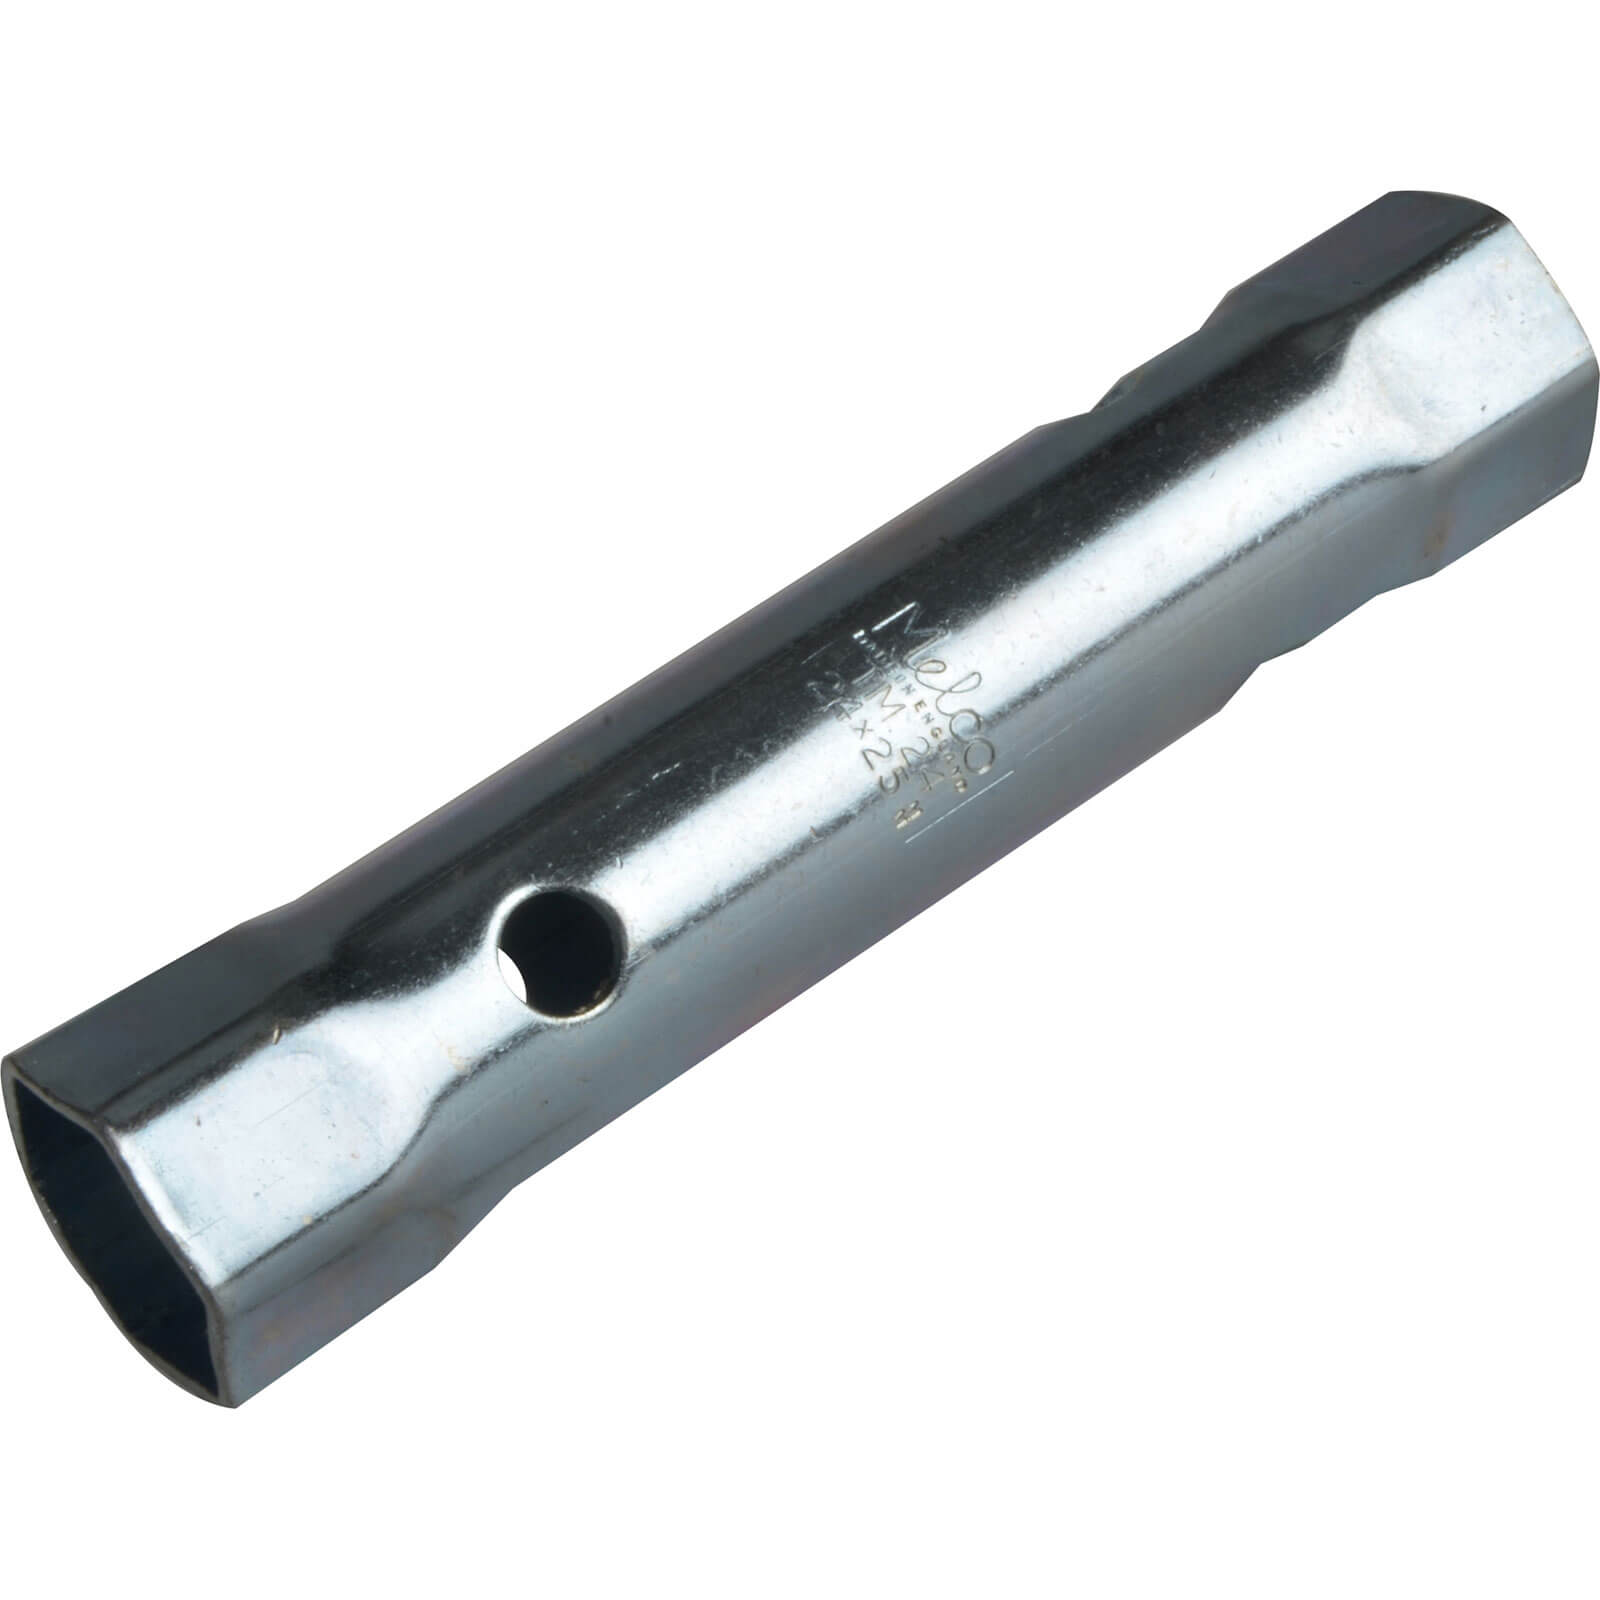 Photo of Melco Box Spanner Metric 24mm X 25mm